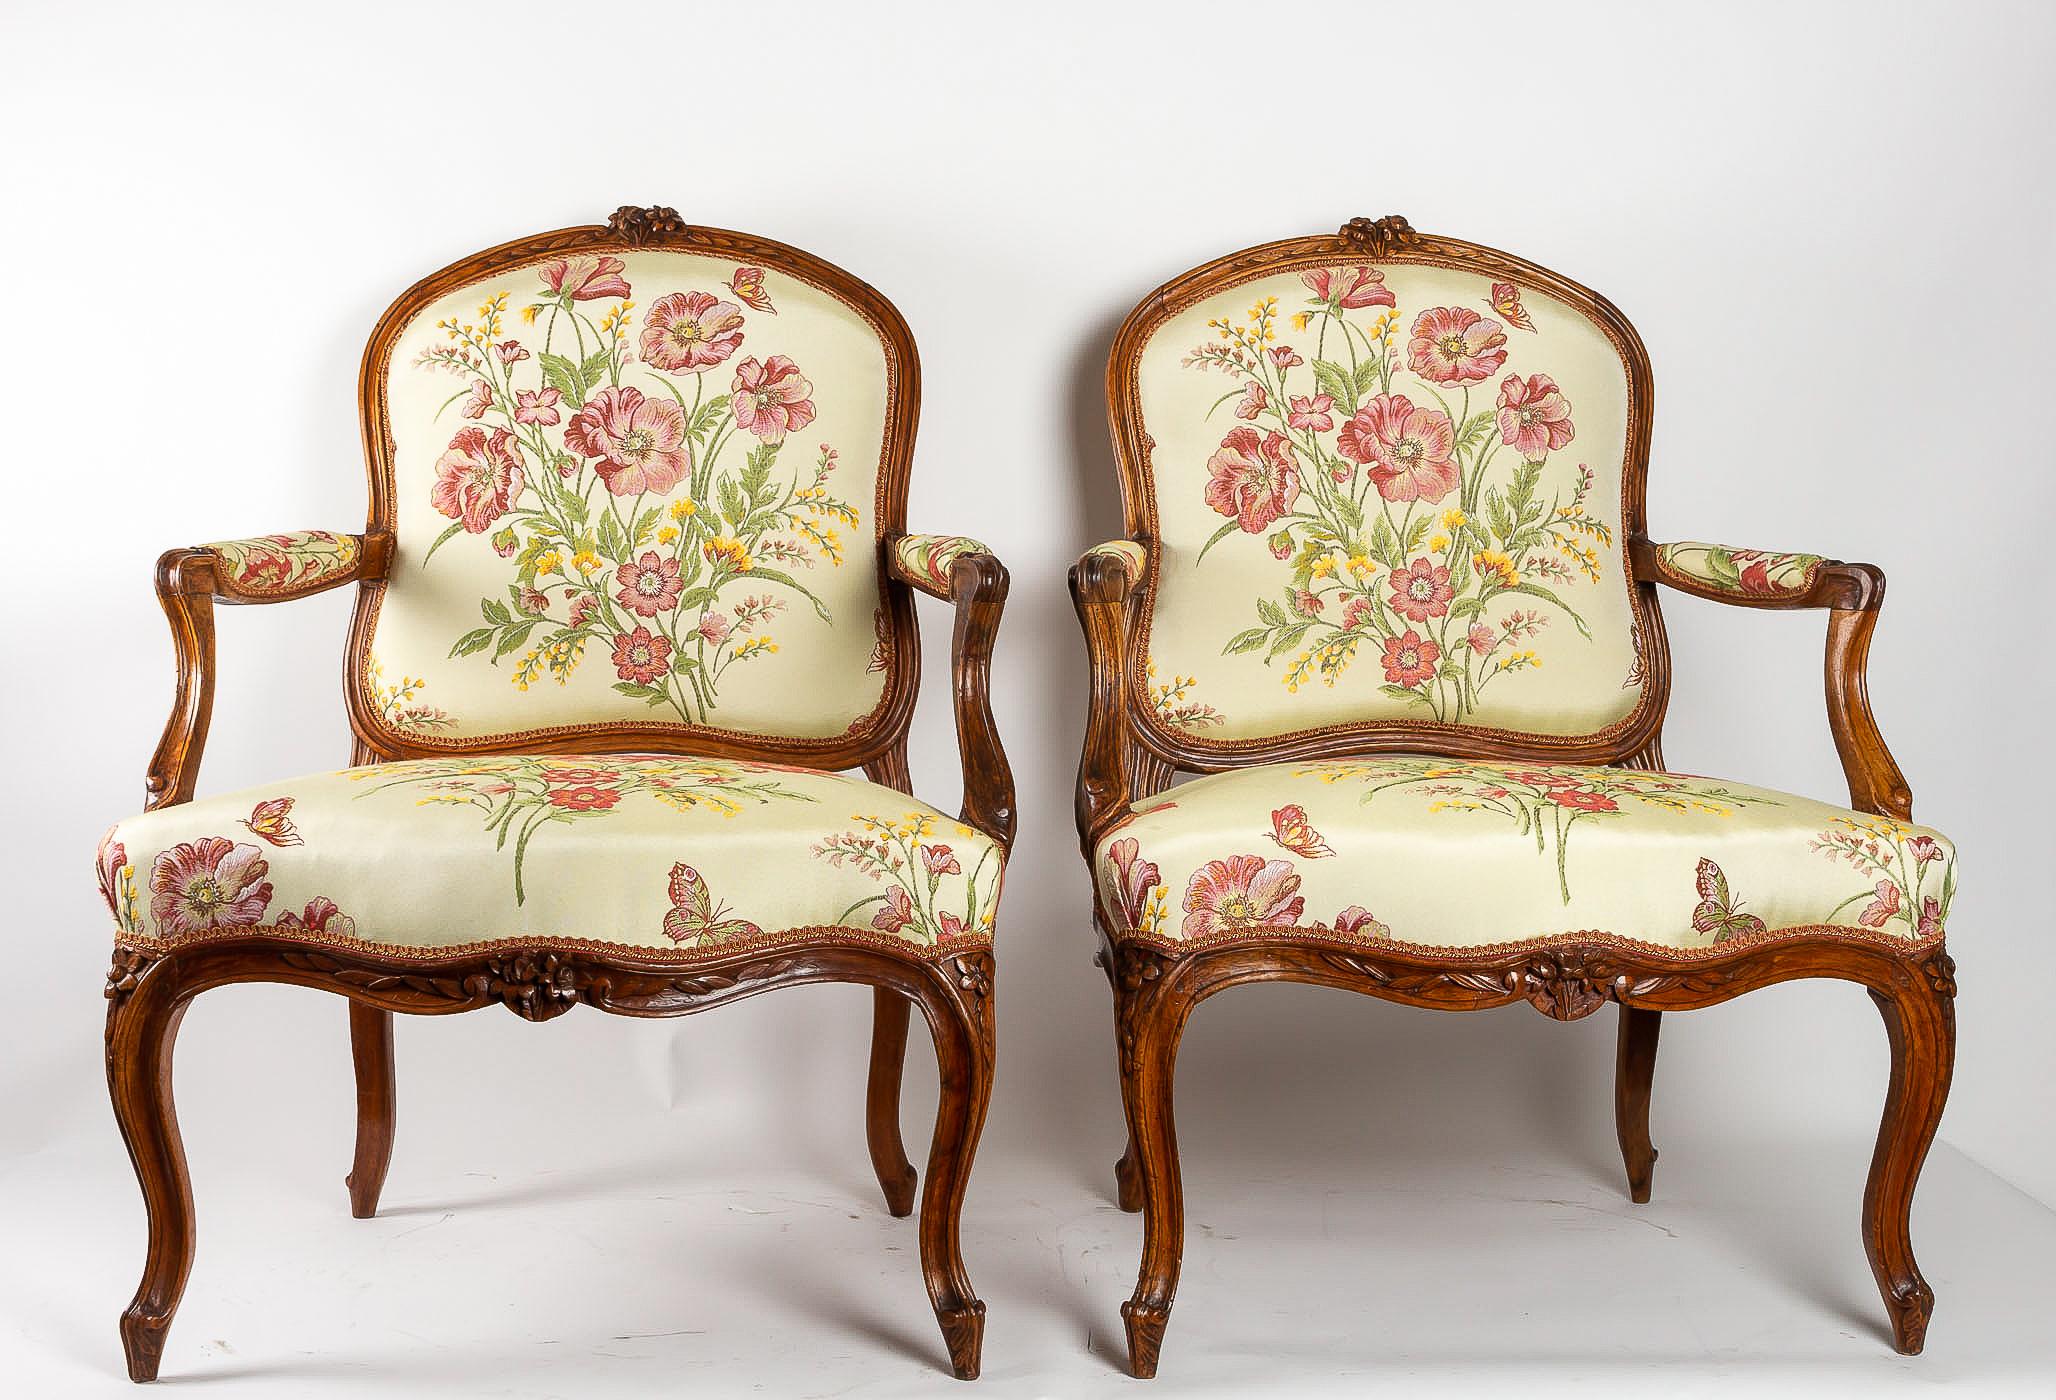 Stamped by Martin Jardin pair of large Louis XV walnut armchairs, circa 1760.

Elegant and decorative pair of large walnut carved armchairs, stamped by Martin Jardin.

French work, manufactured in the city of Lyon, late Louis XV period, circa